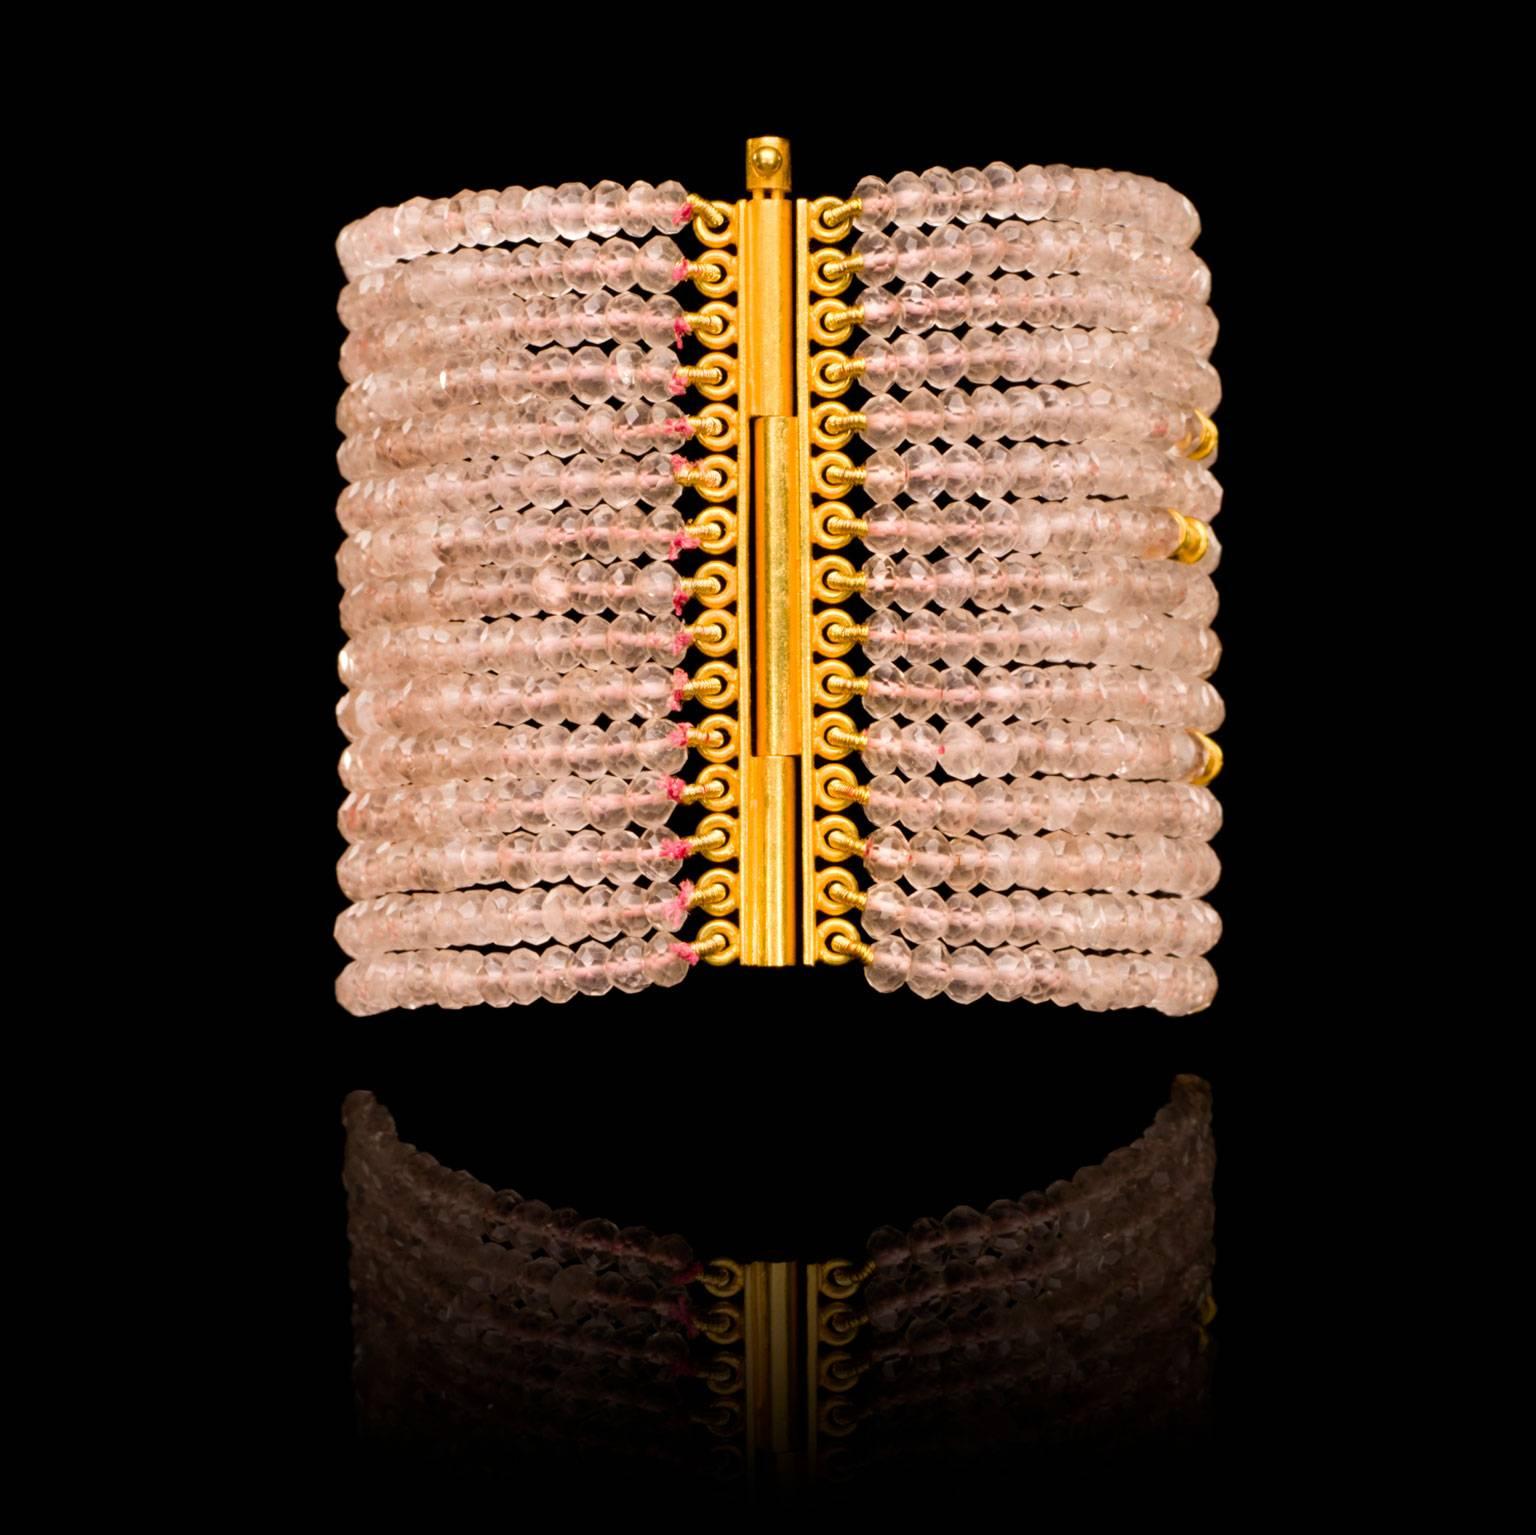 An 18k gold and rose quartz cuff bracelet with a traditional Indian clasp.  The cuff is 6.5 cm, 2.55in wide and 18cm, 7.08in long. Gold beads mingle with rose quartz beads in this versatile hand crafted piece which will effortlessly take you from